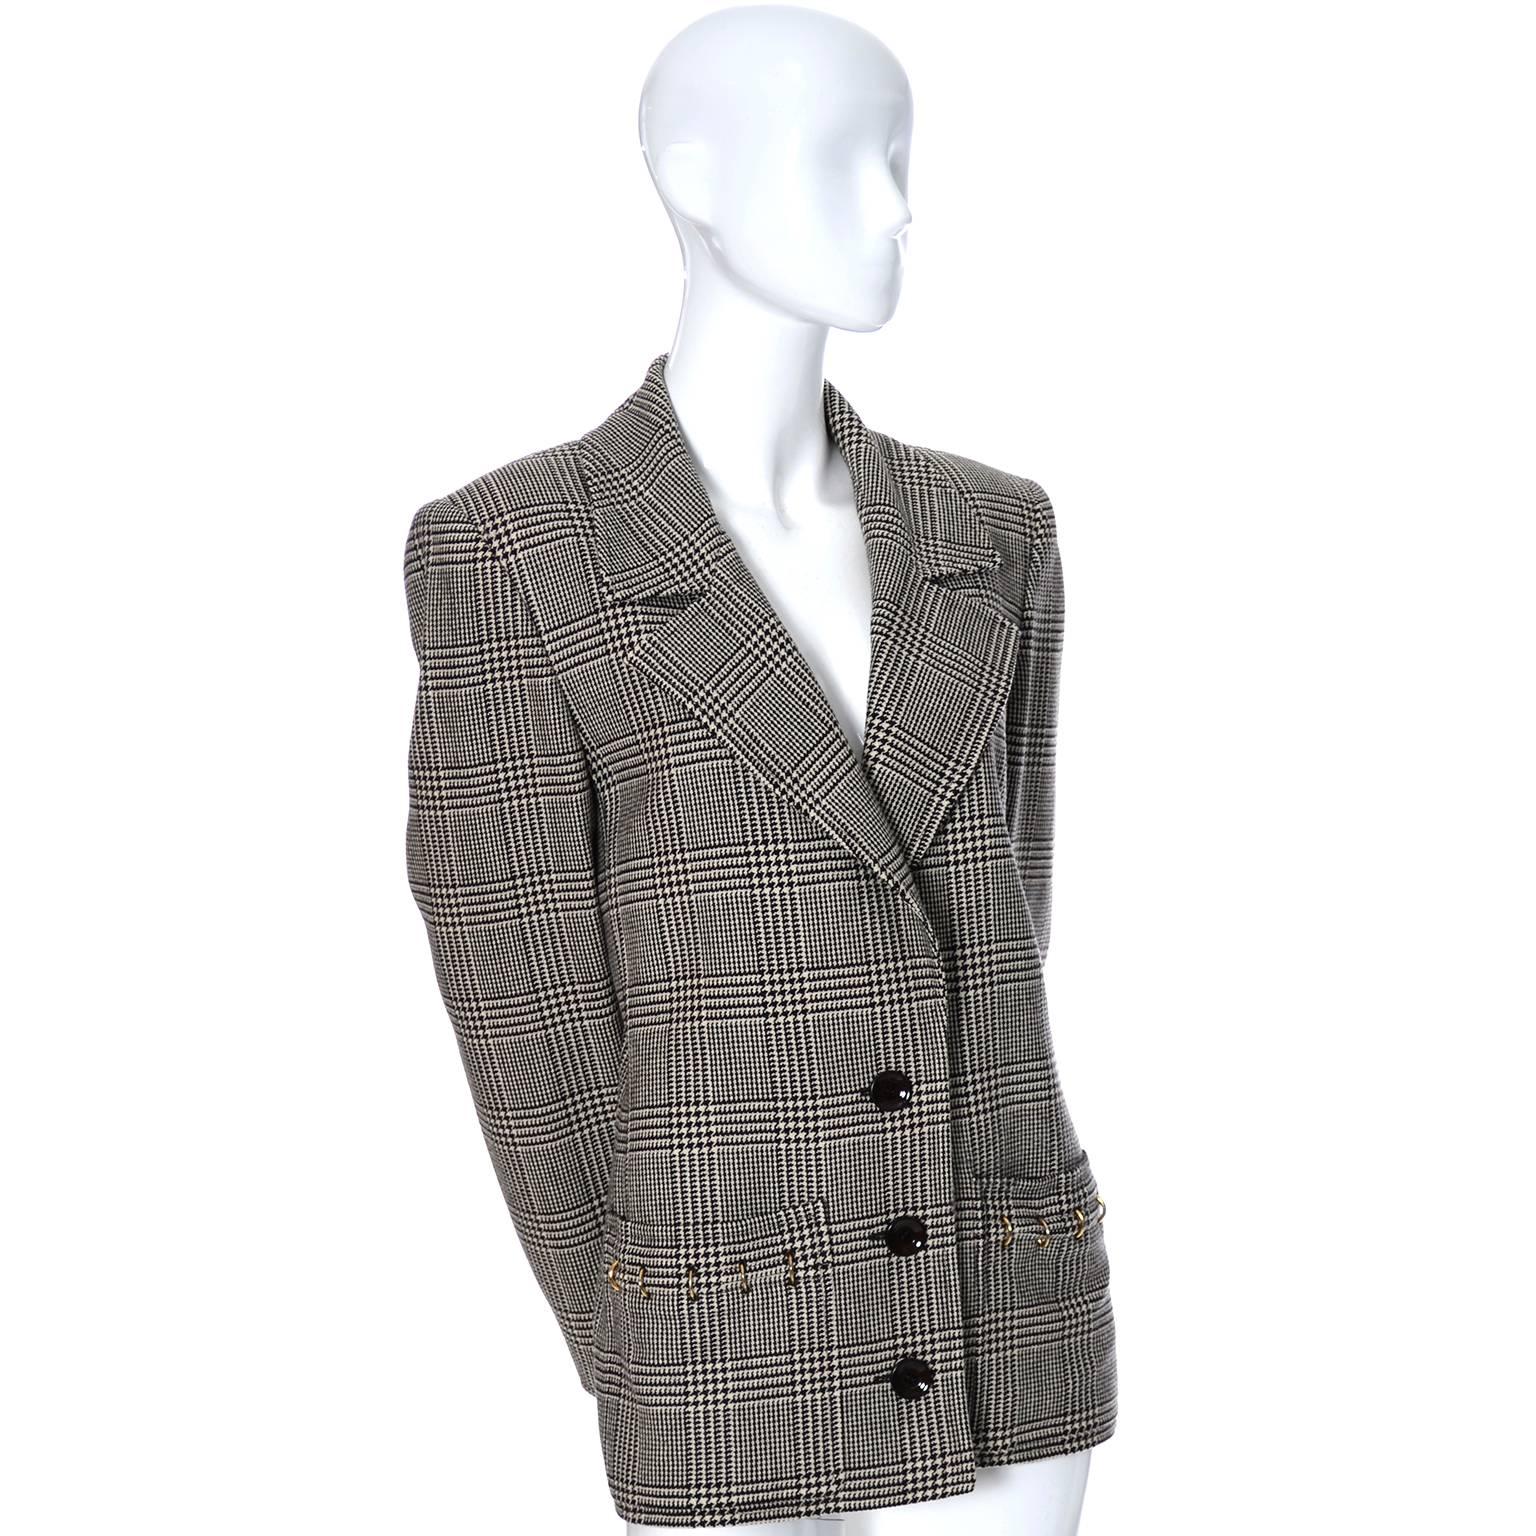 This is a vintage Valentino Boutique blazer fab metal rings on the pockets and the cuffs of the sleeves. The jacket is fully lined and made in a plaid black and ivory wool.  Please use the measurements as a guide for the best fit, but I would